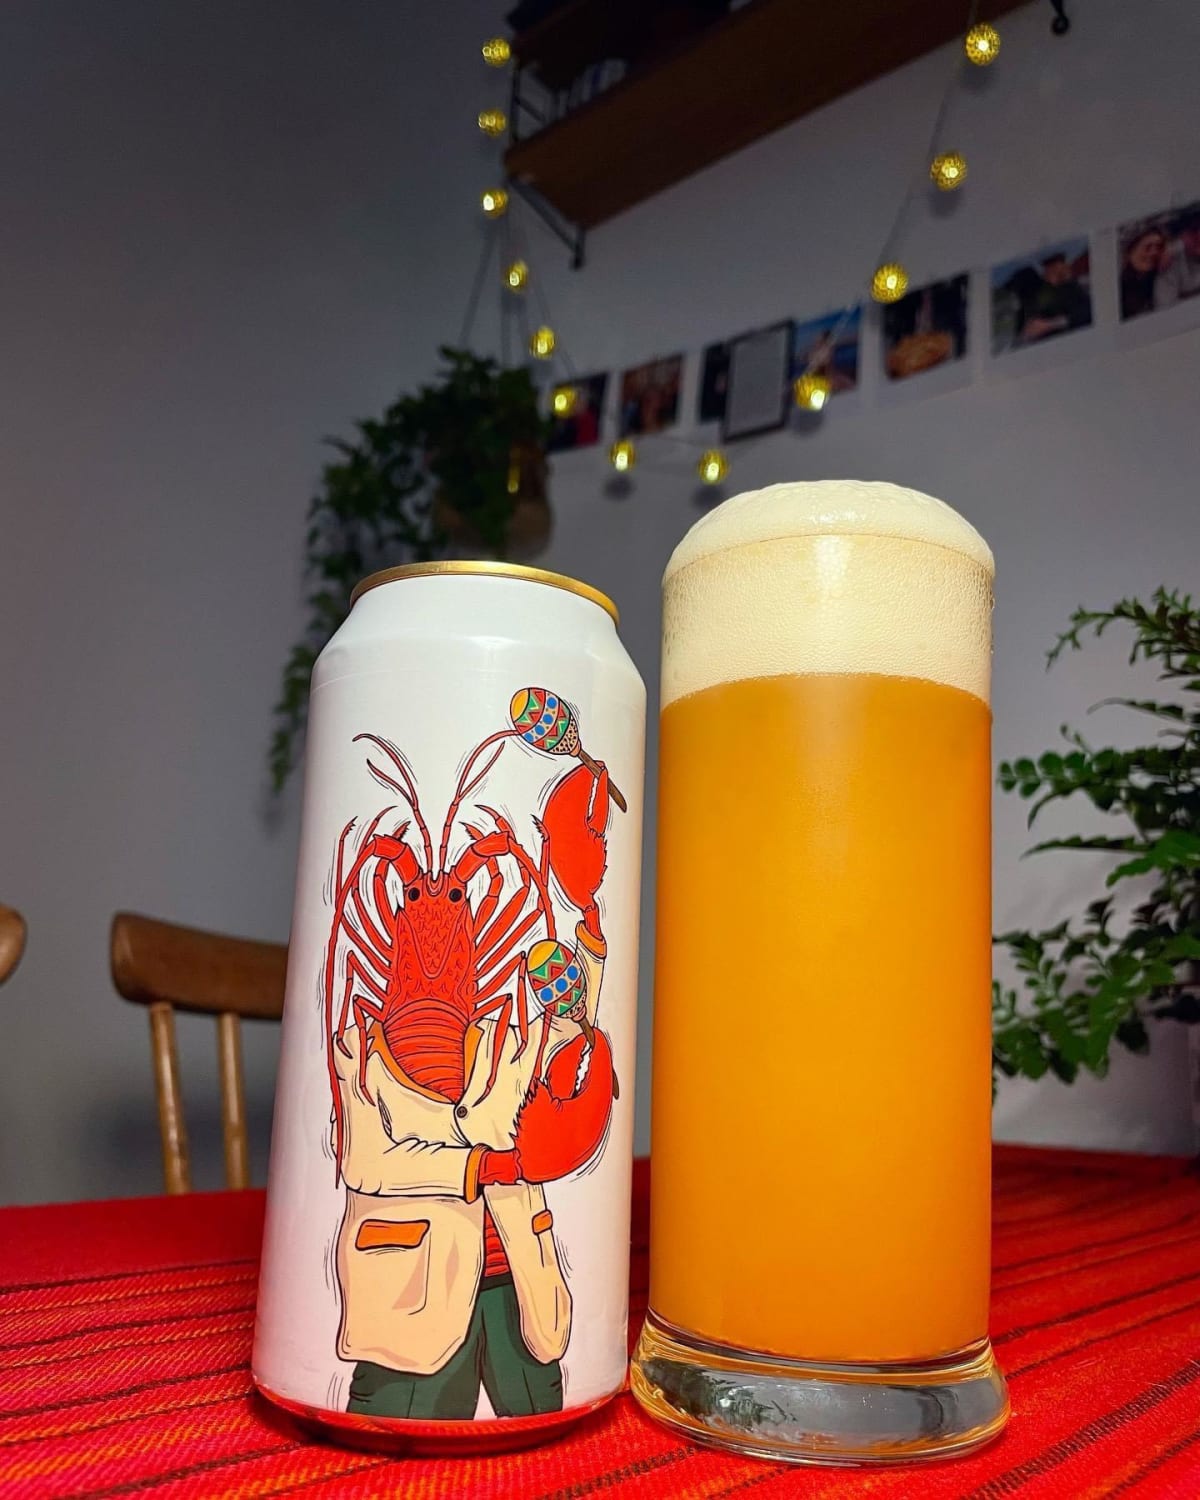 So a Swedish Brewery is lauching a new beer for the lobster fishing premiere.